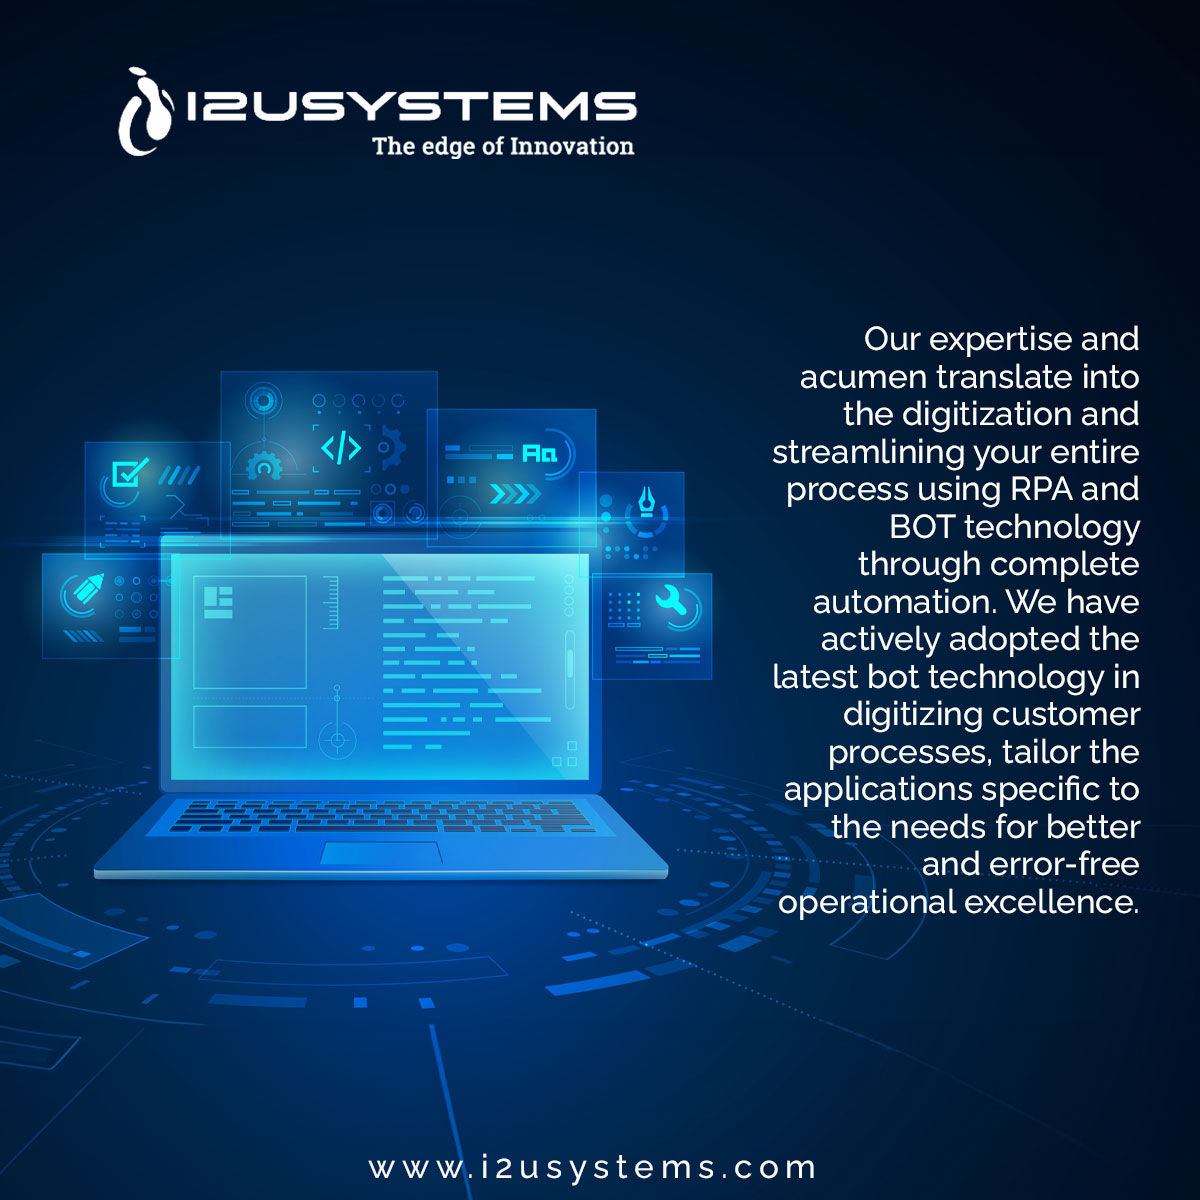 Our expertise and acumen translate into the digitization and streamlining your entire process using RPA and BOT technology through complete automation. #i2usystems #c2crequirements #w2jobs #directclient #IOT #artificial #acumen #digitization #BOT #automation #operational